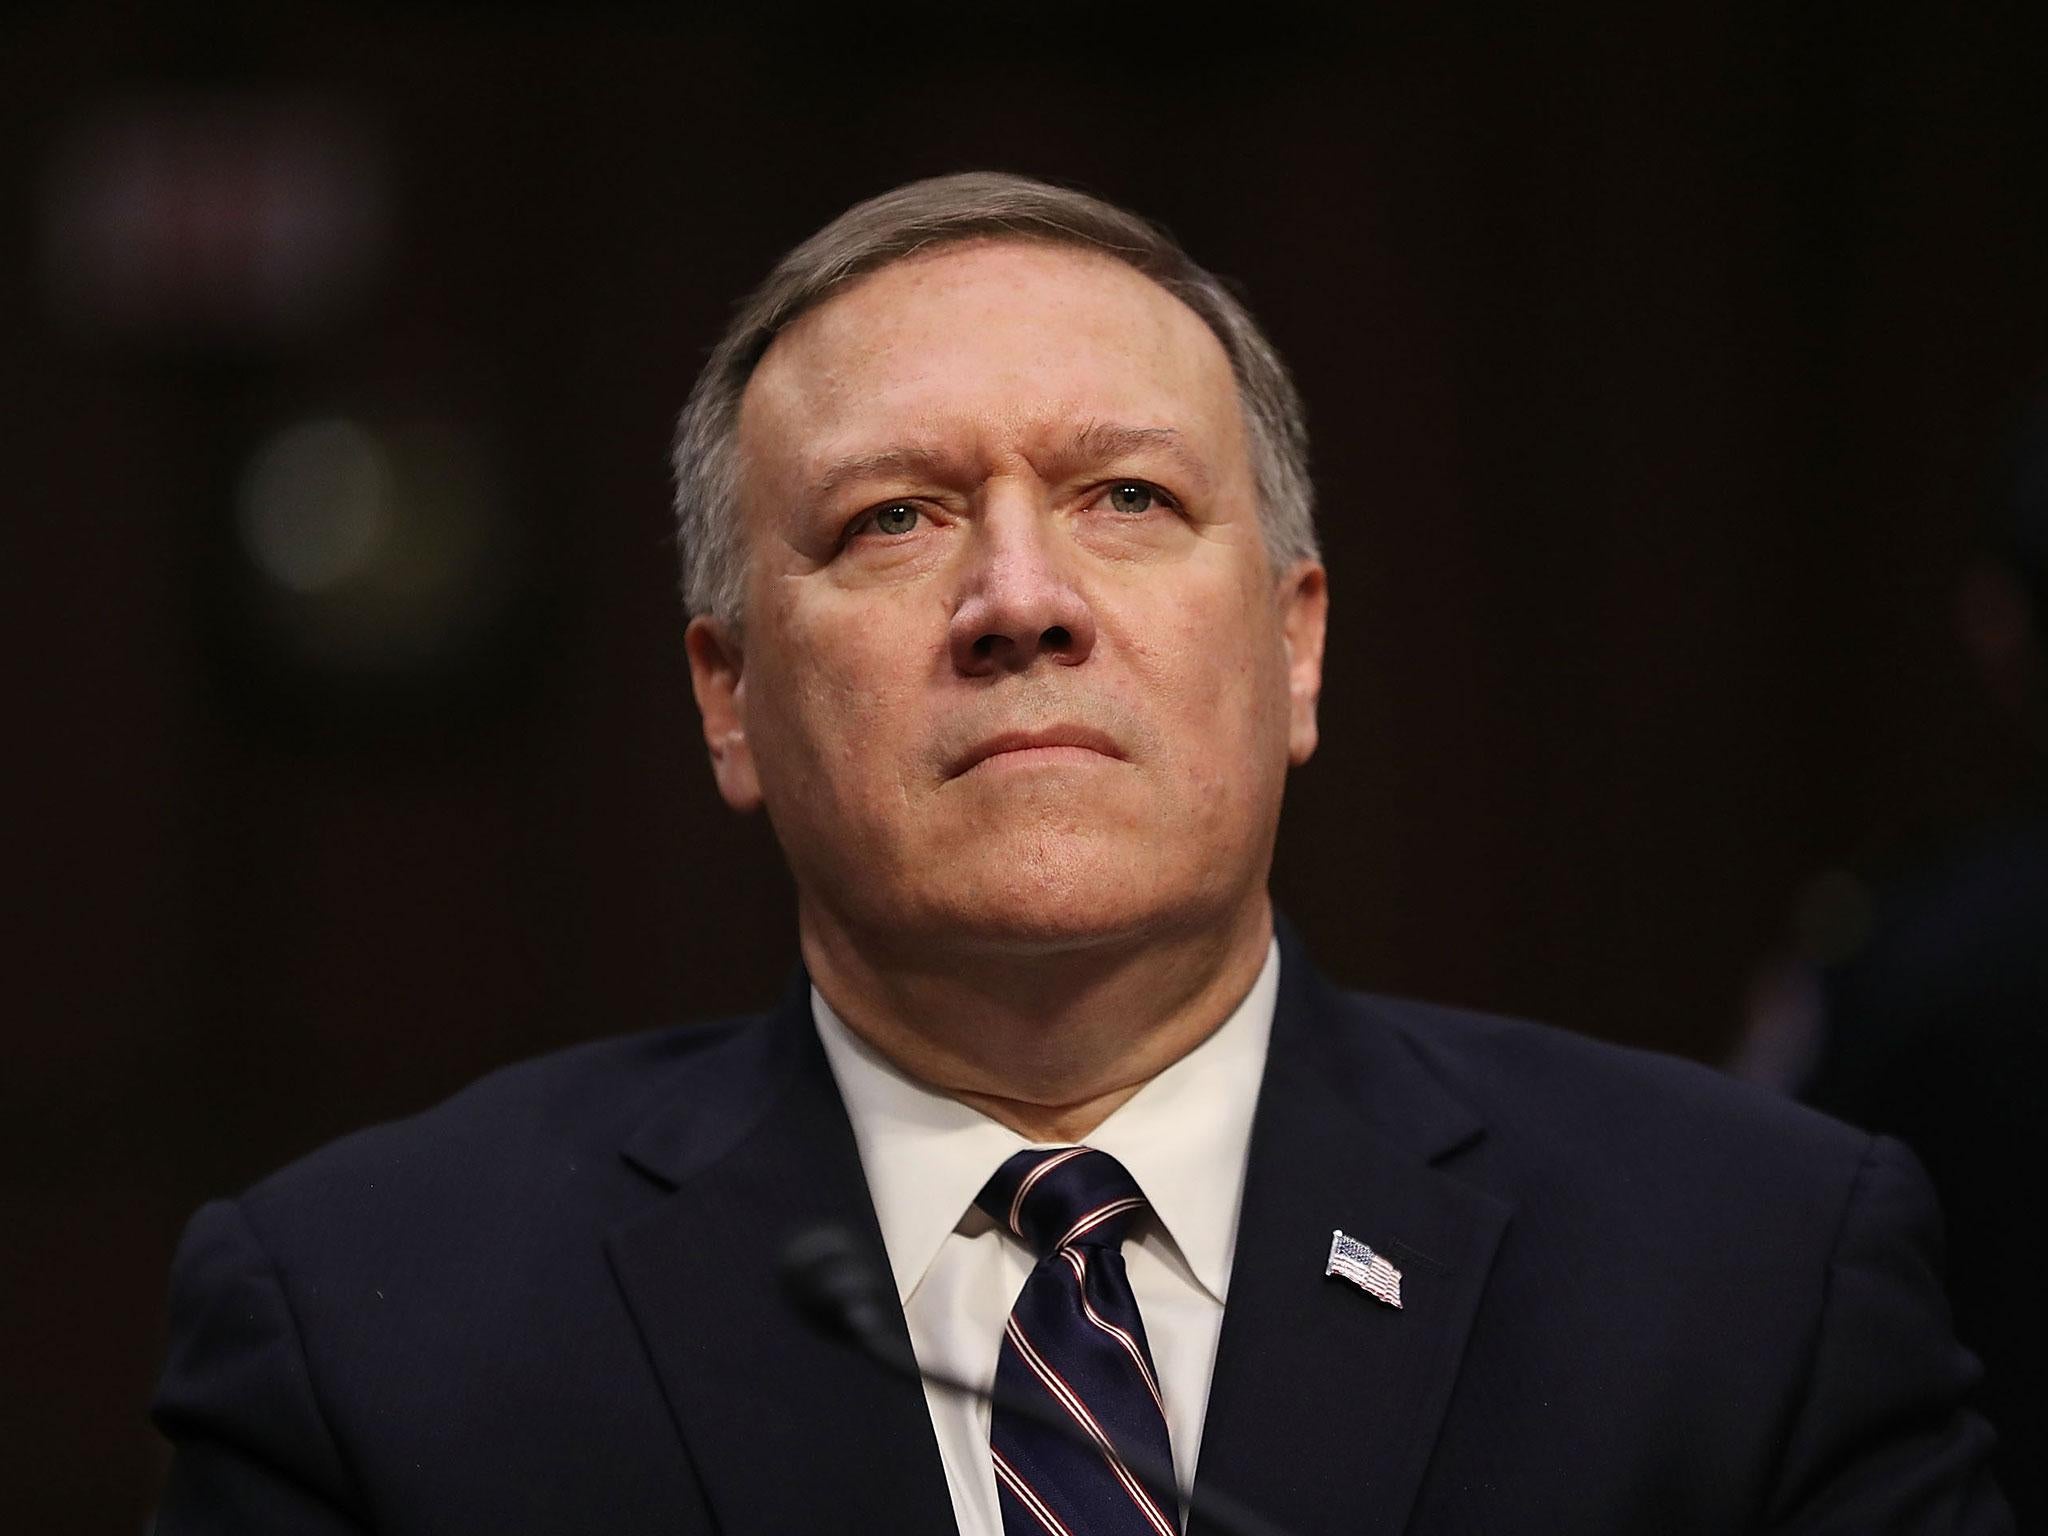 Mike Pompeo criticised Barack Obama from prohibiting the use of waterboarding and other harsh techniques after he assumed office in 2009